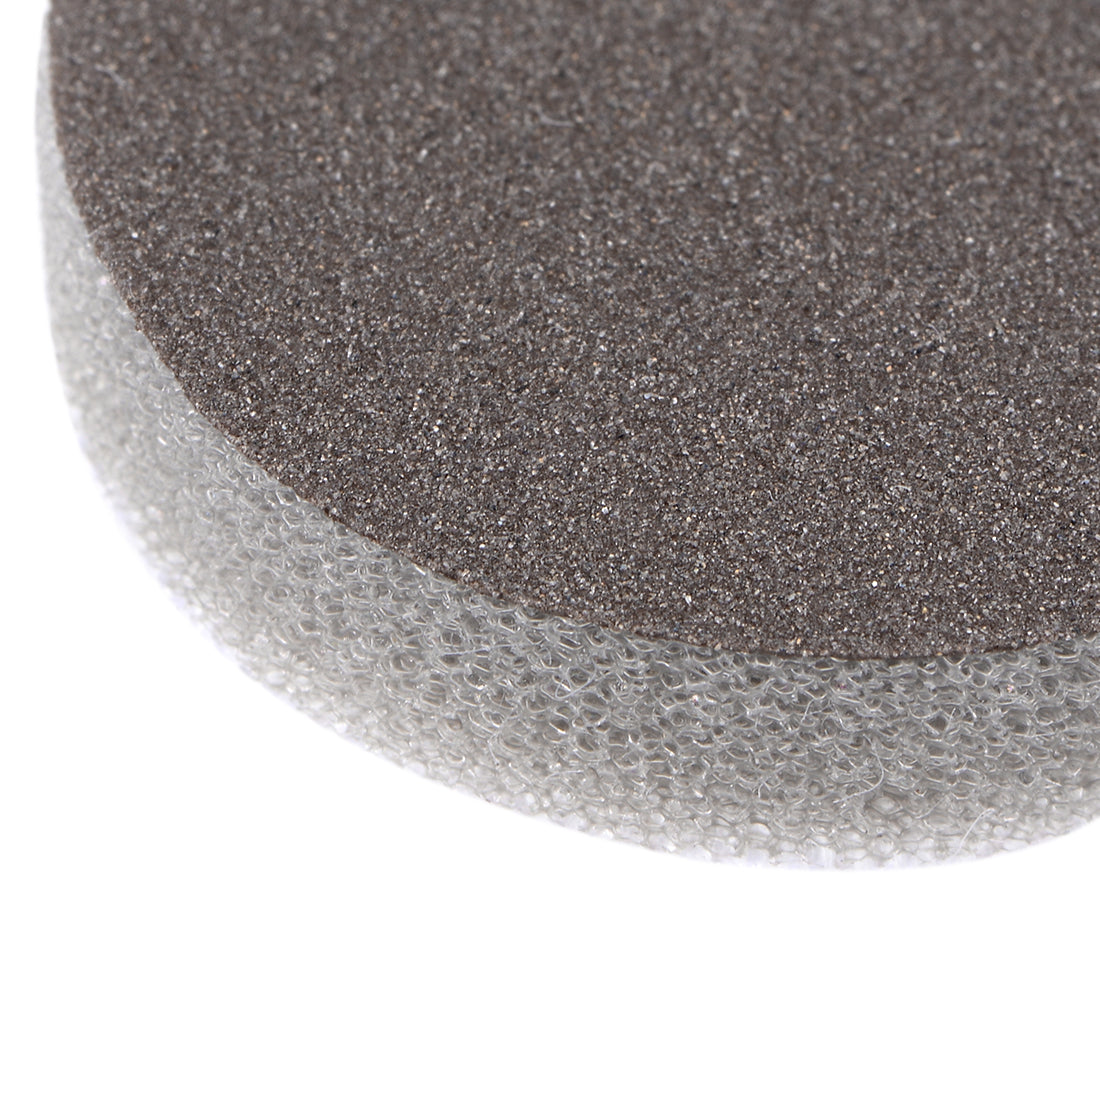 Uxcell Uxcell 1.2-Inch 400-Grits Hook and Loop Sanding Disc, Sponge Sanding Pad Wet Dry Aluminum Oxide Sandpaper for Polishing & Grinding 5pcs